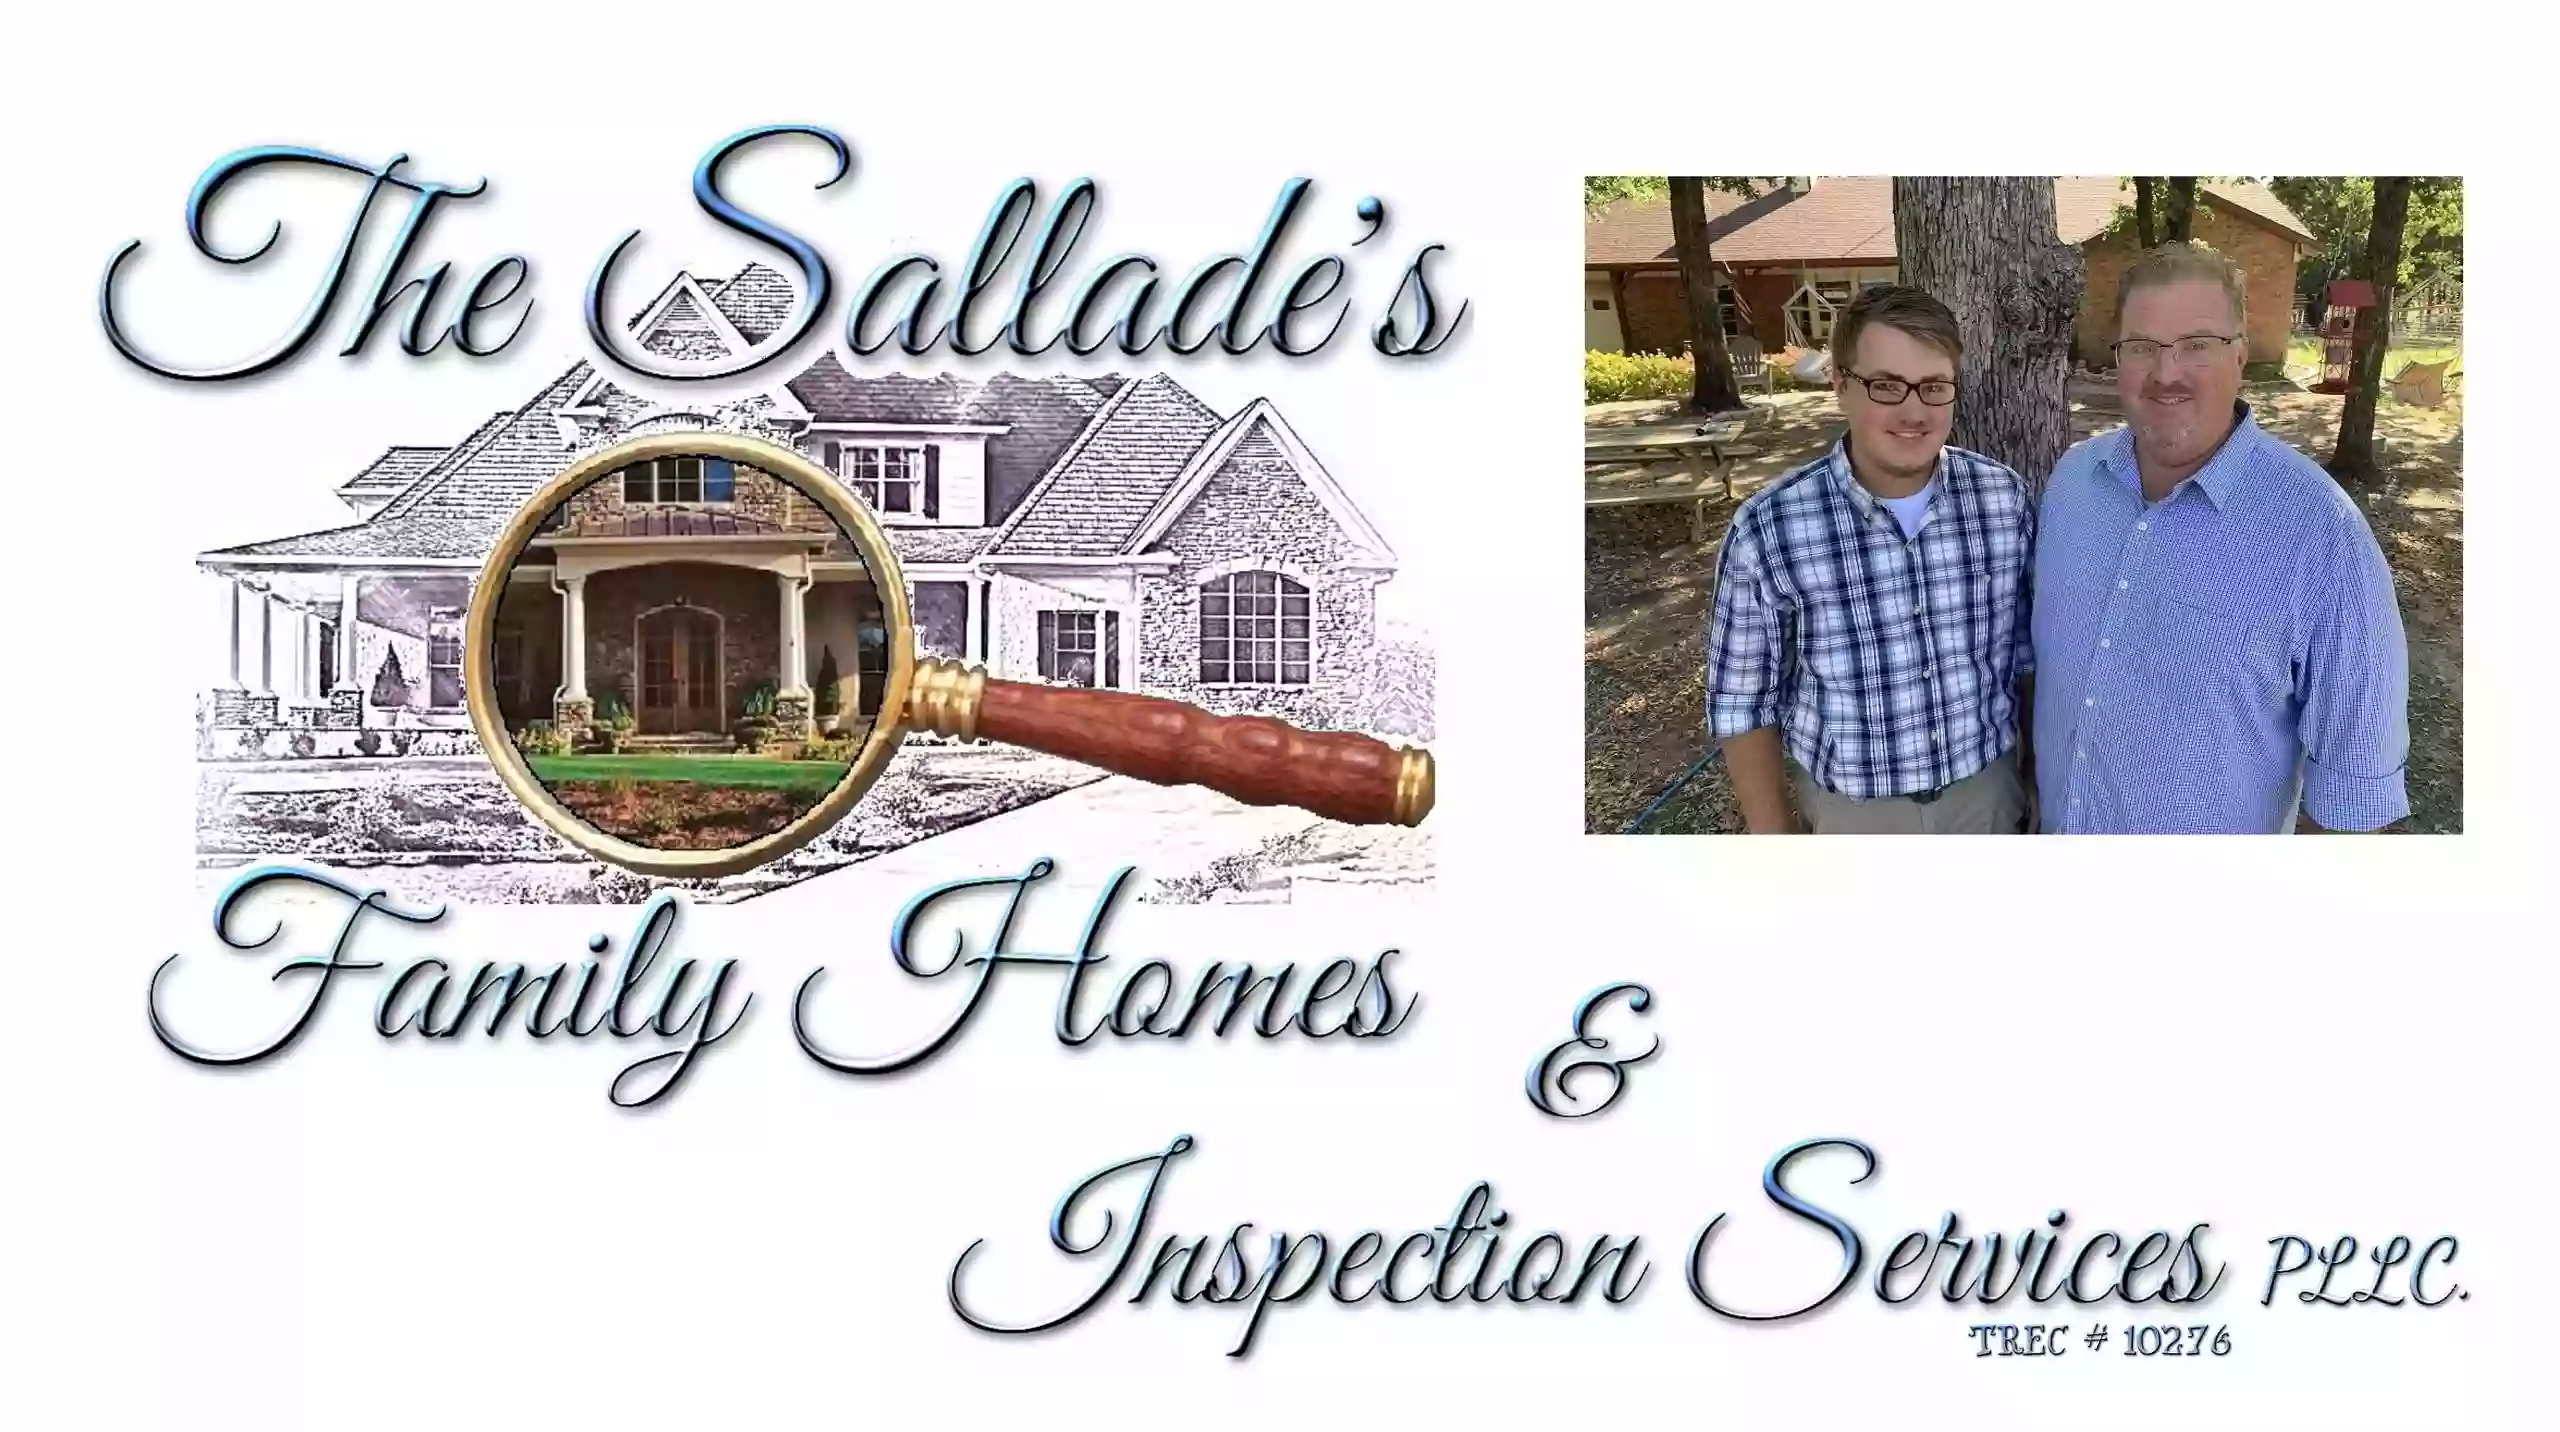 The Sallade's Inspection Services TREC #10276